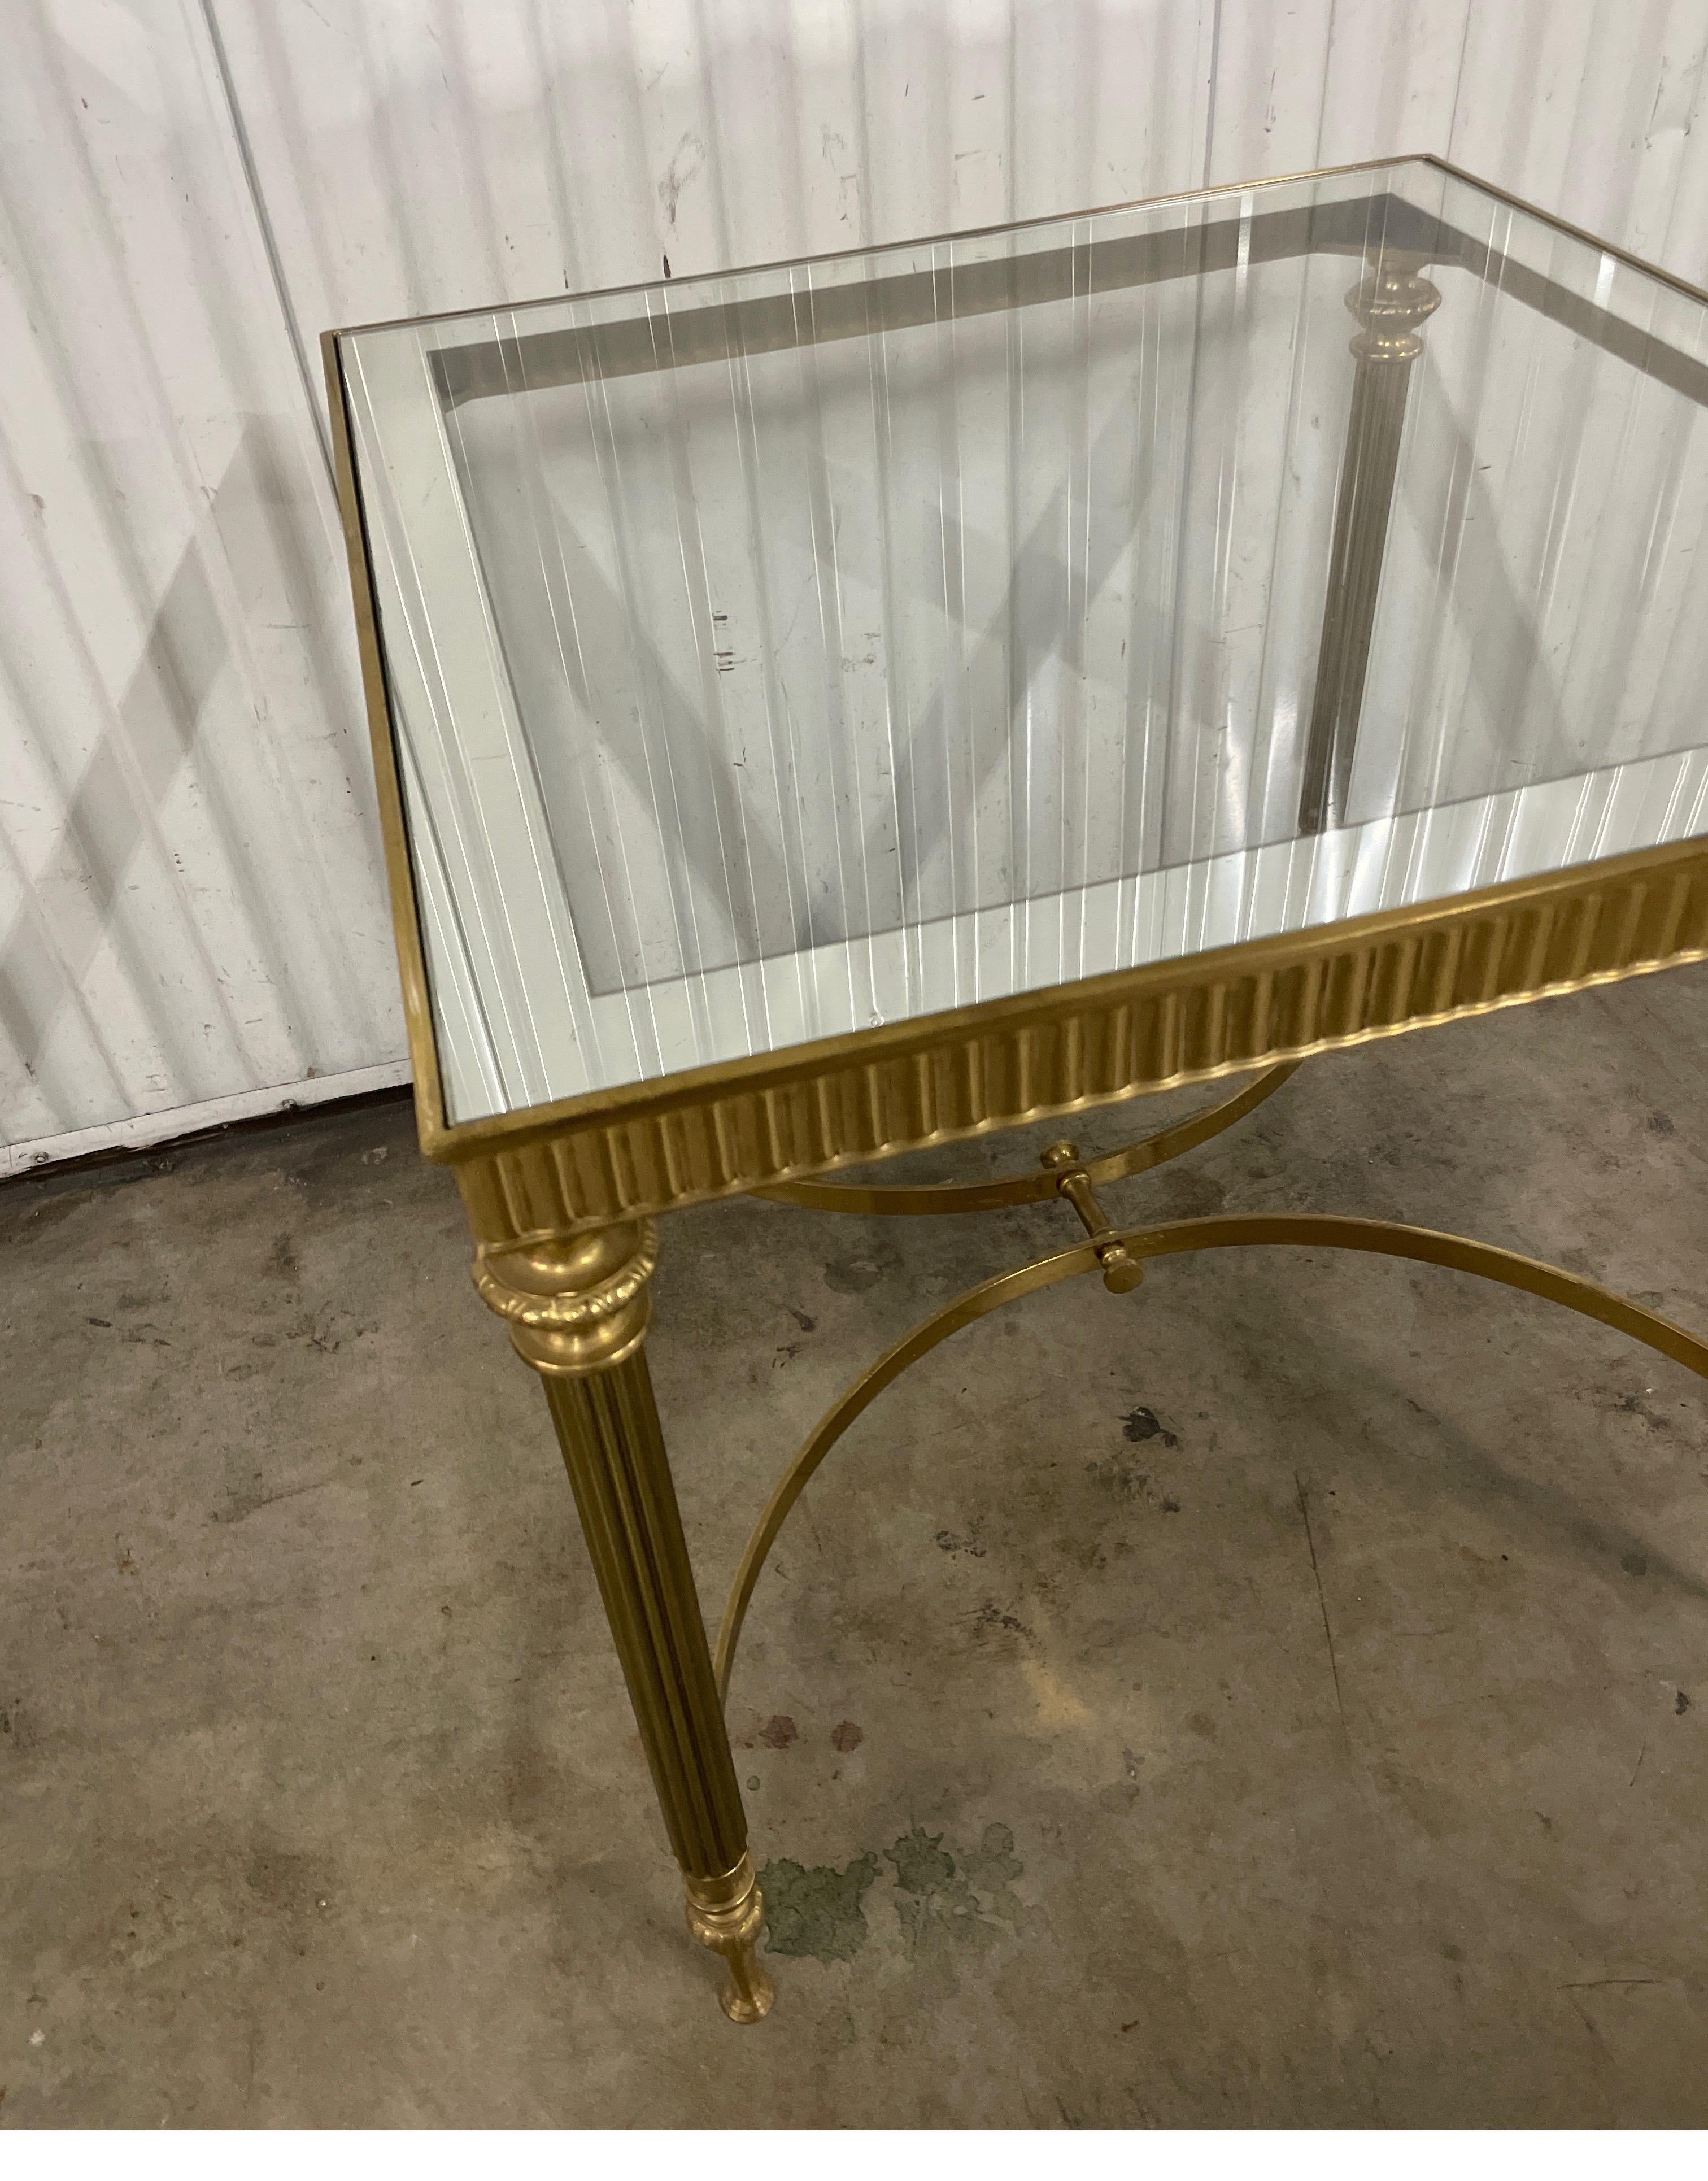 Neoclassical style brass square side table by Maison Jansen. The top is glass with a mirrored border surround. All four legs are connected with brass stretchers. Legs and top surround are all fluted.